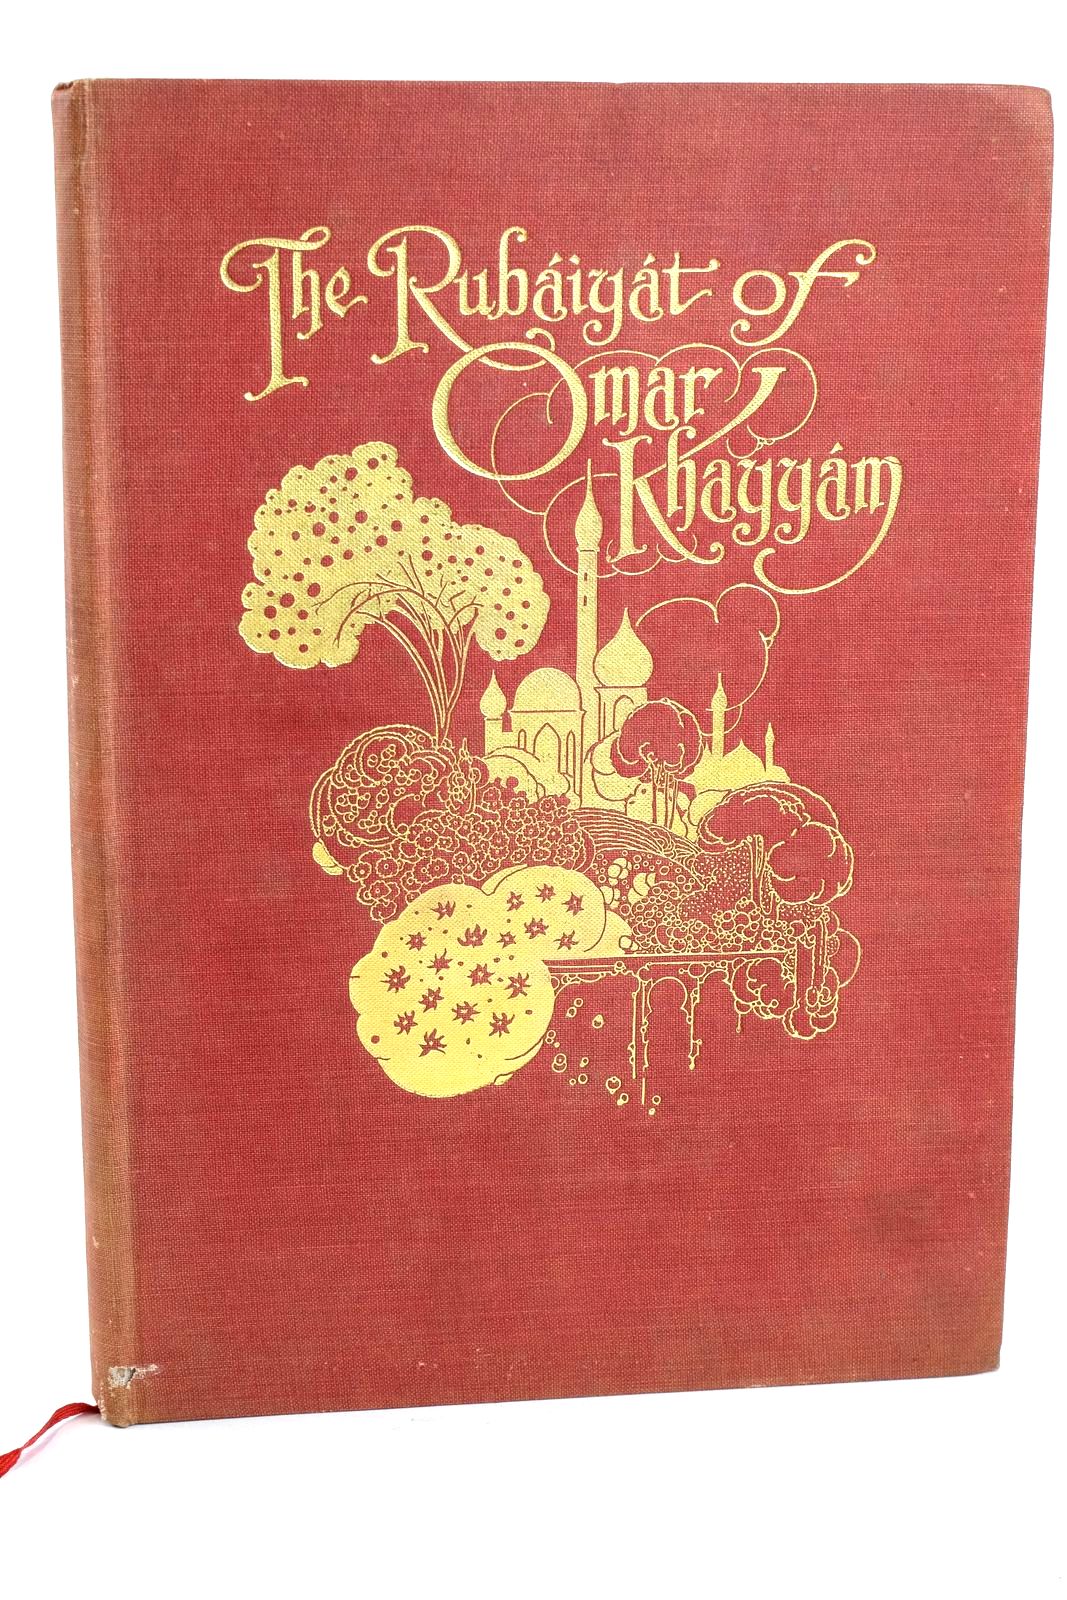 Photo of THE RUBAIYAT OF OMAR KHAYYAM written by Khayyam, Omar Fitzgerald, Edward Housman, Laurence illustrated by Robinson, Charles published by Collins (STOCK CODE: 1318593)  for sale by Stella & Rose's Books